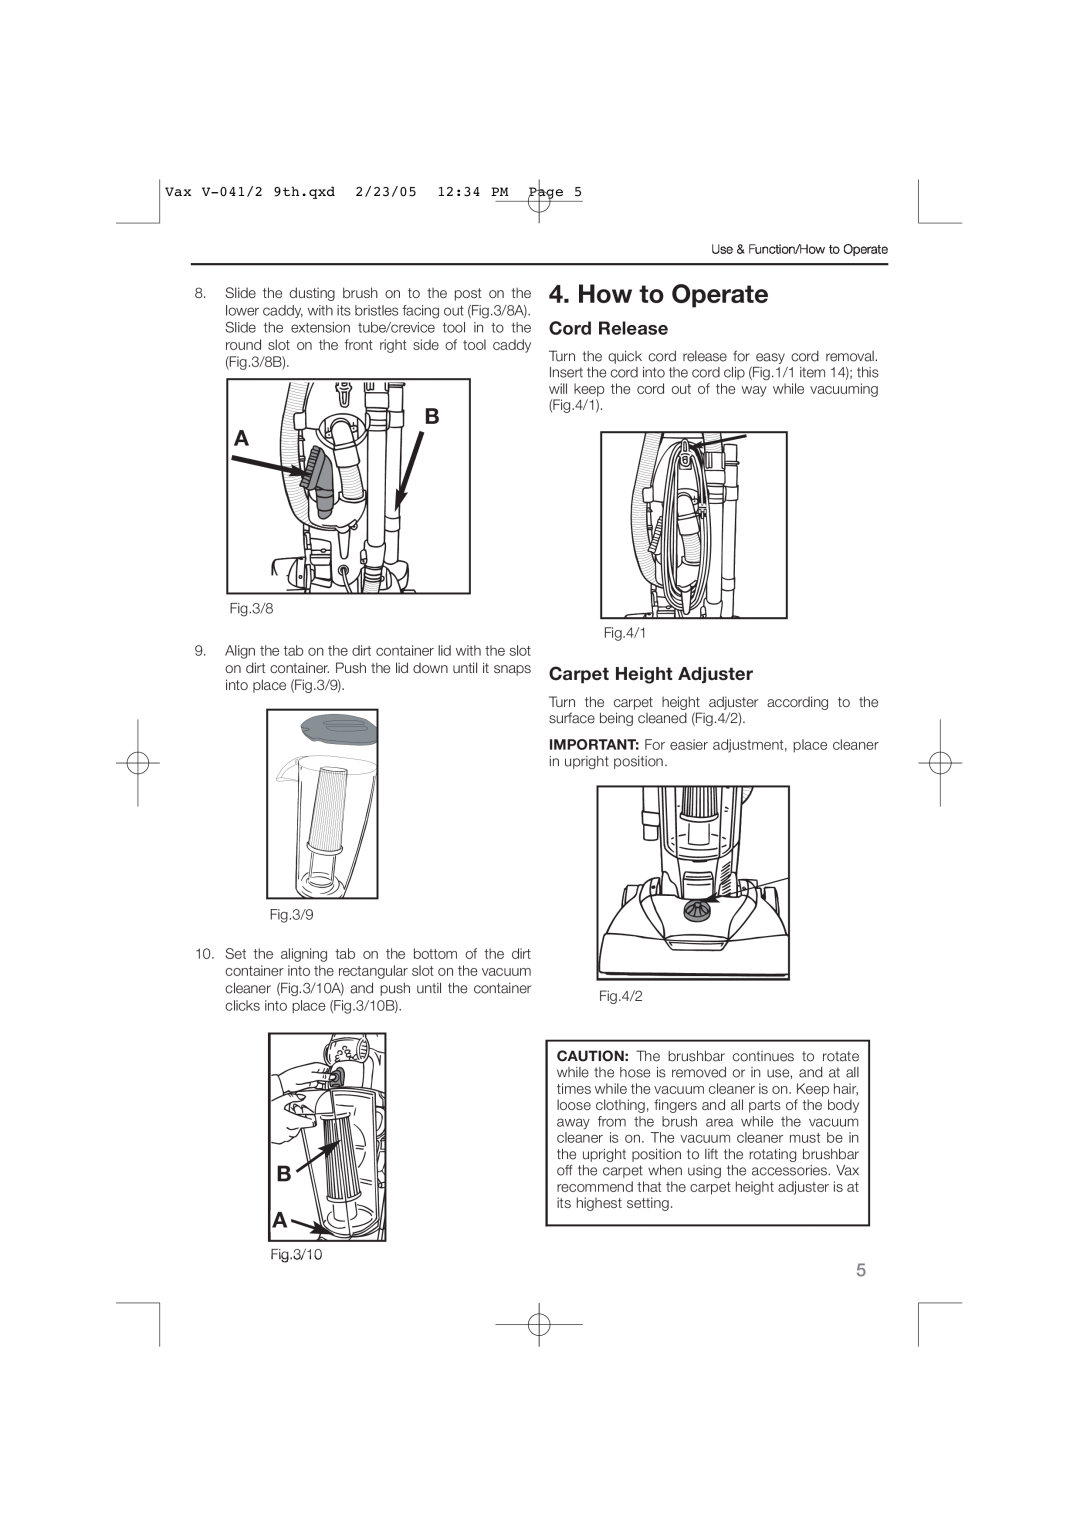 Vax V-041, V-042 instruction manual How to Operate, Cord Release, Carpet Height Adjuster 